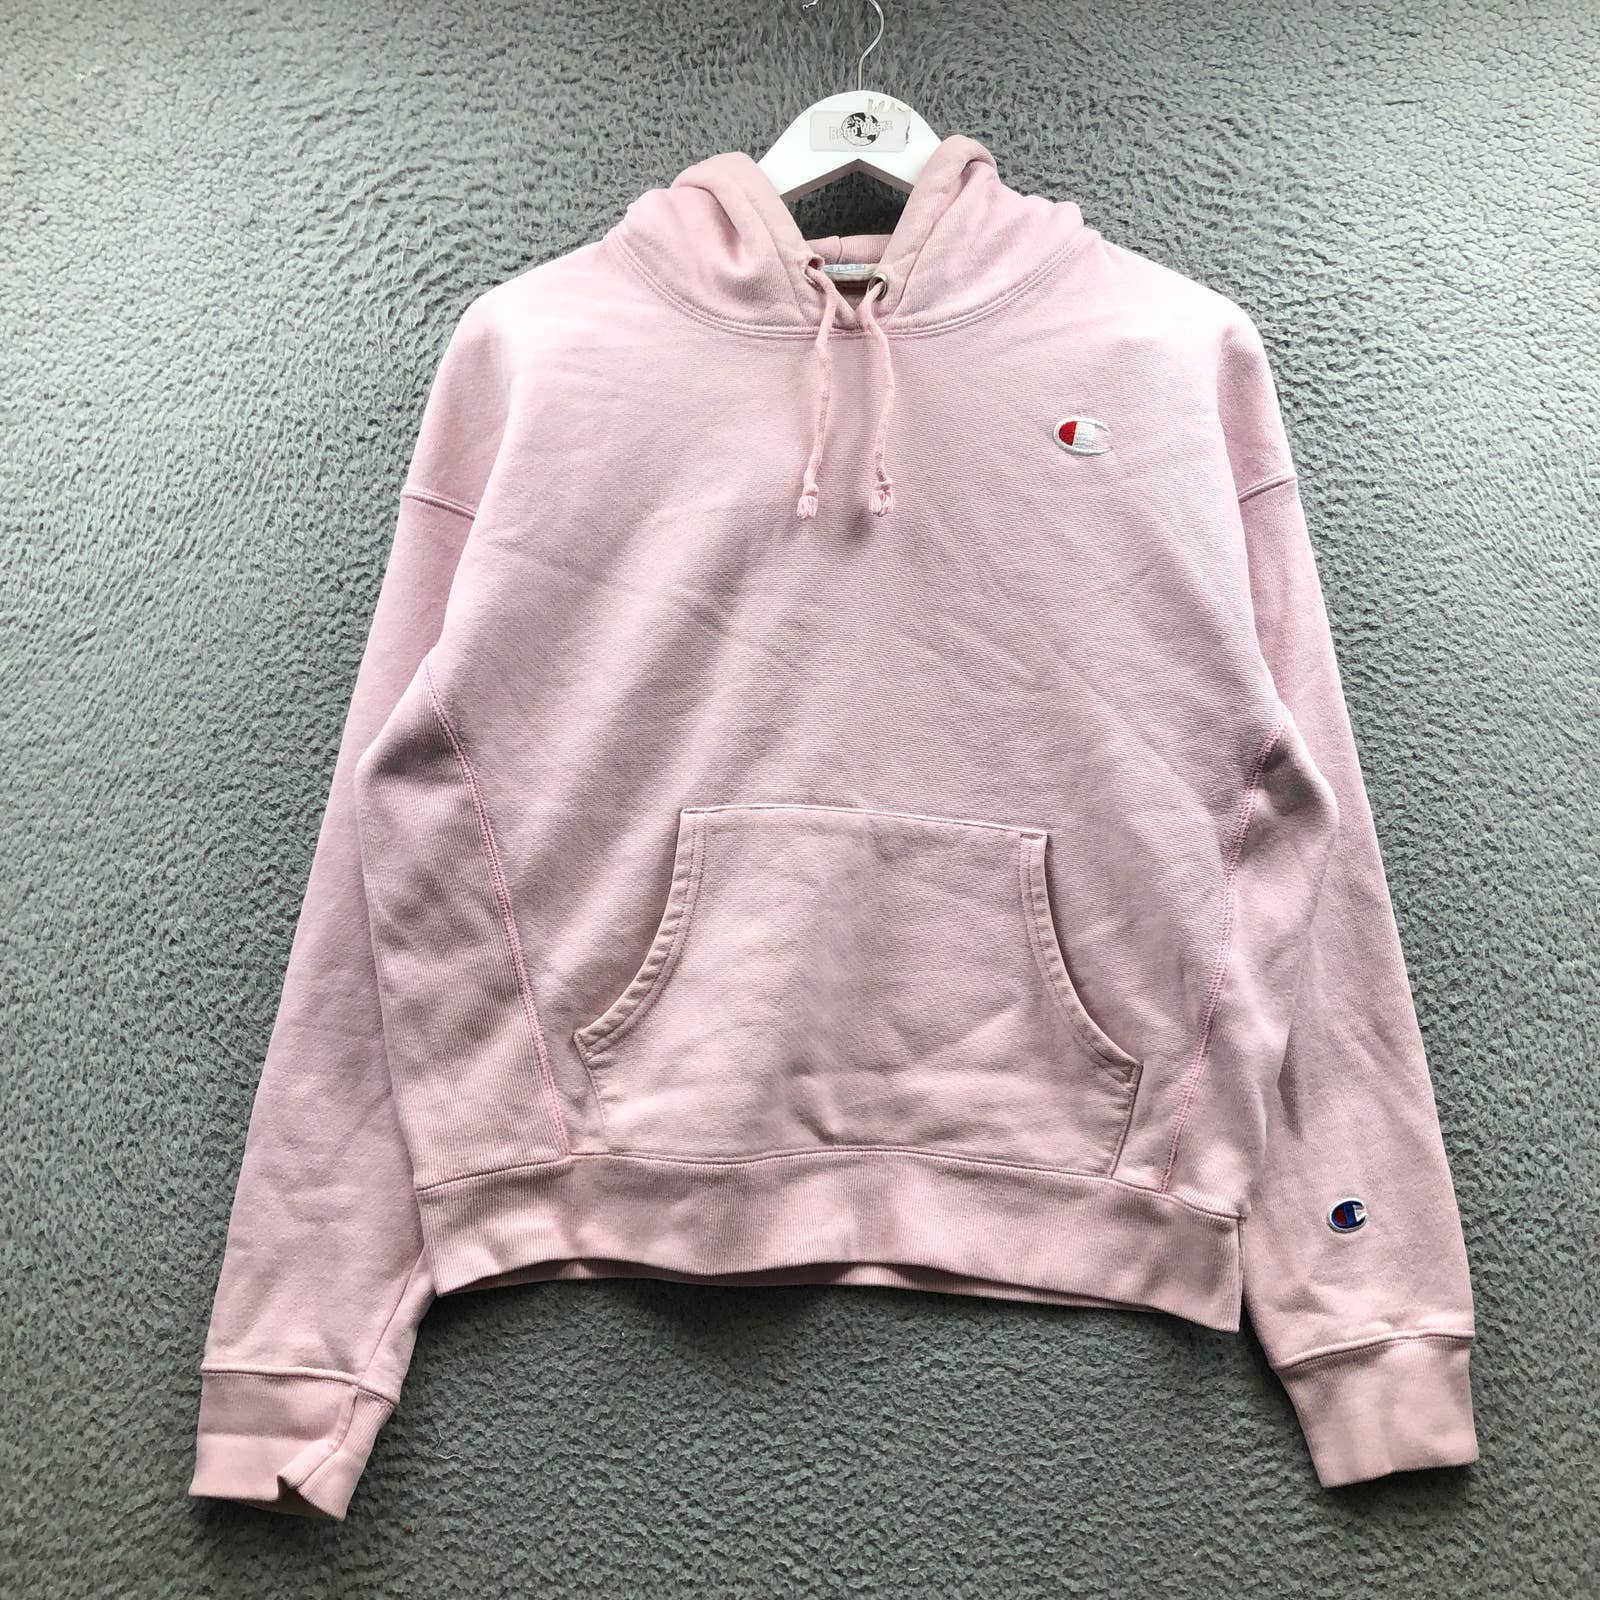 cheapest place to buy  Champion Reverse Weave Sweatshir